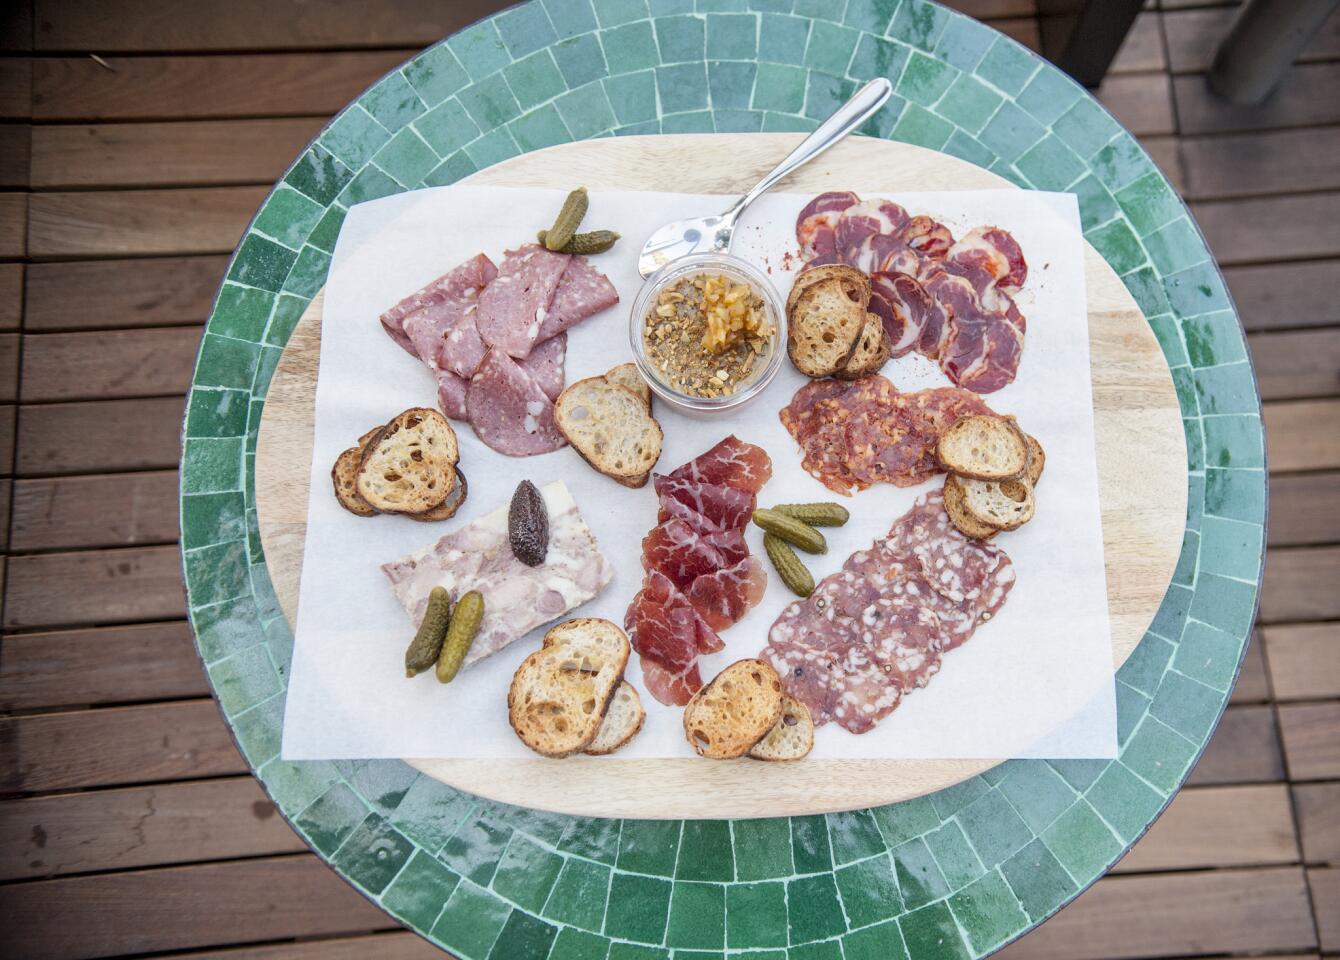 Charcuterie platter at Esters Wine Bar & Shop in Santa Monica includes cured meats from small, artisanal producers across the country picked by Rustic Canyon chef Jeremy Fox, who does the food for the wine bar.